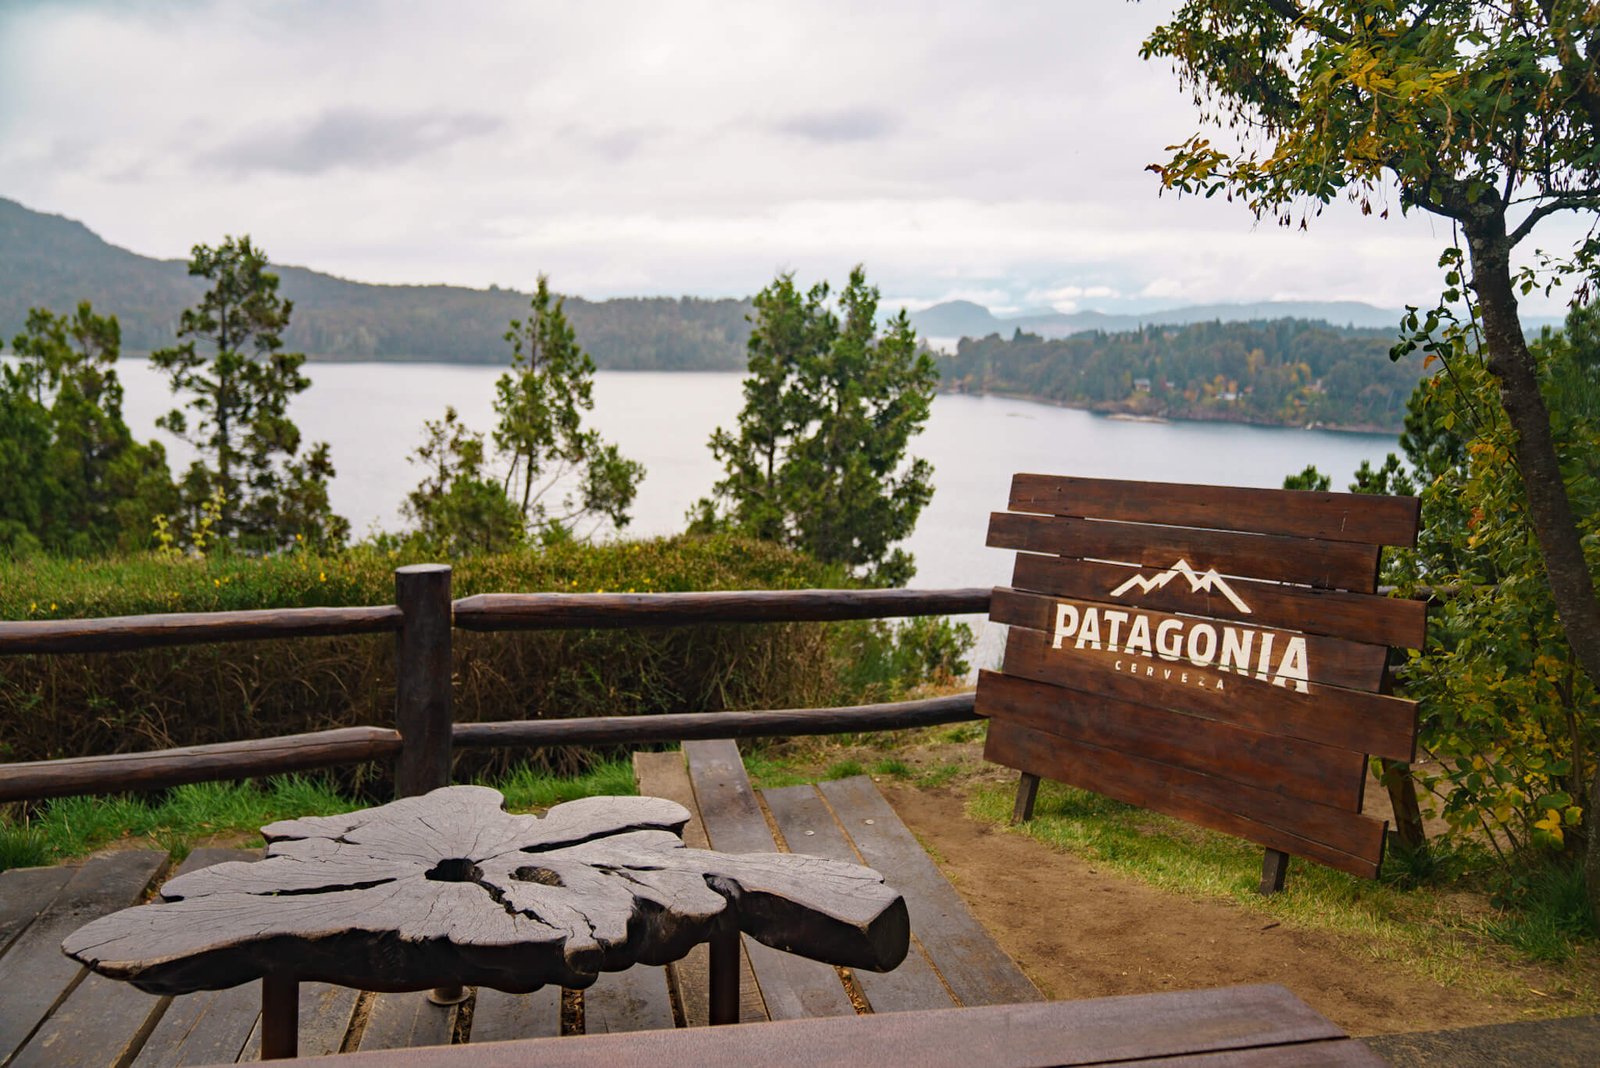 Patagonia brewery, Bariloche